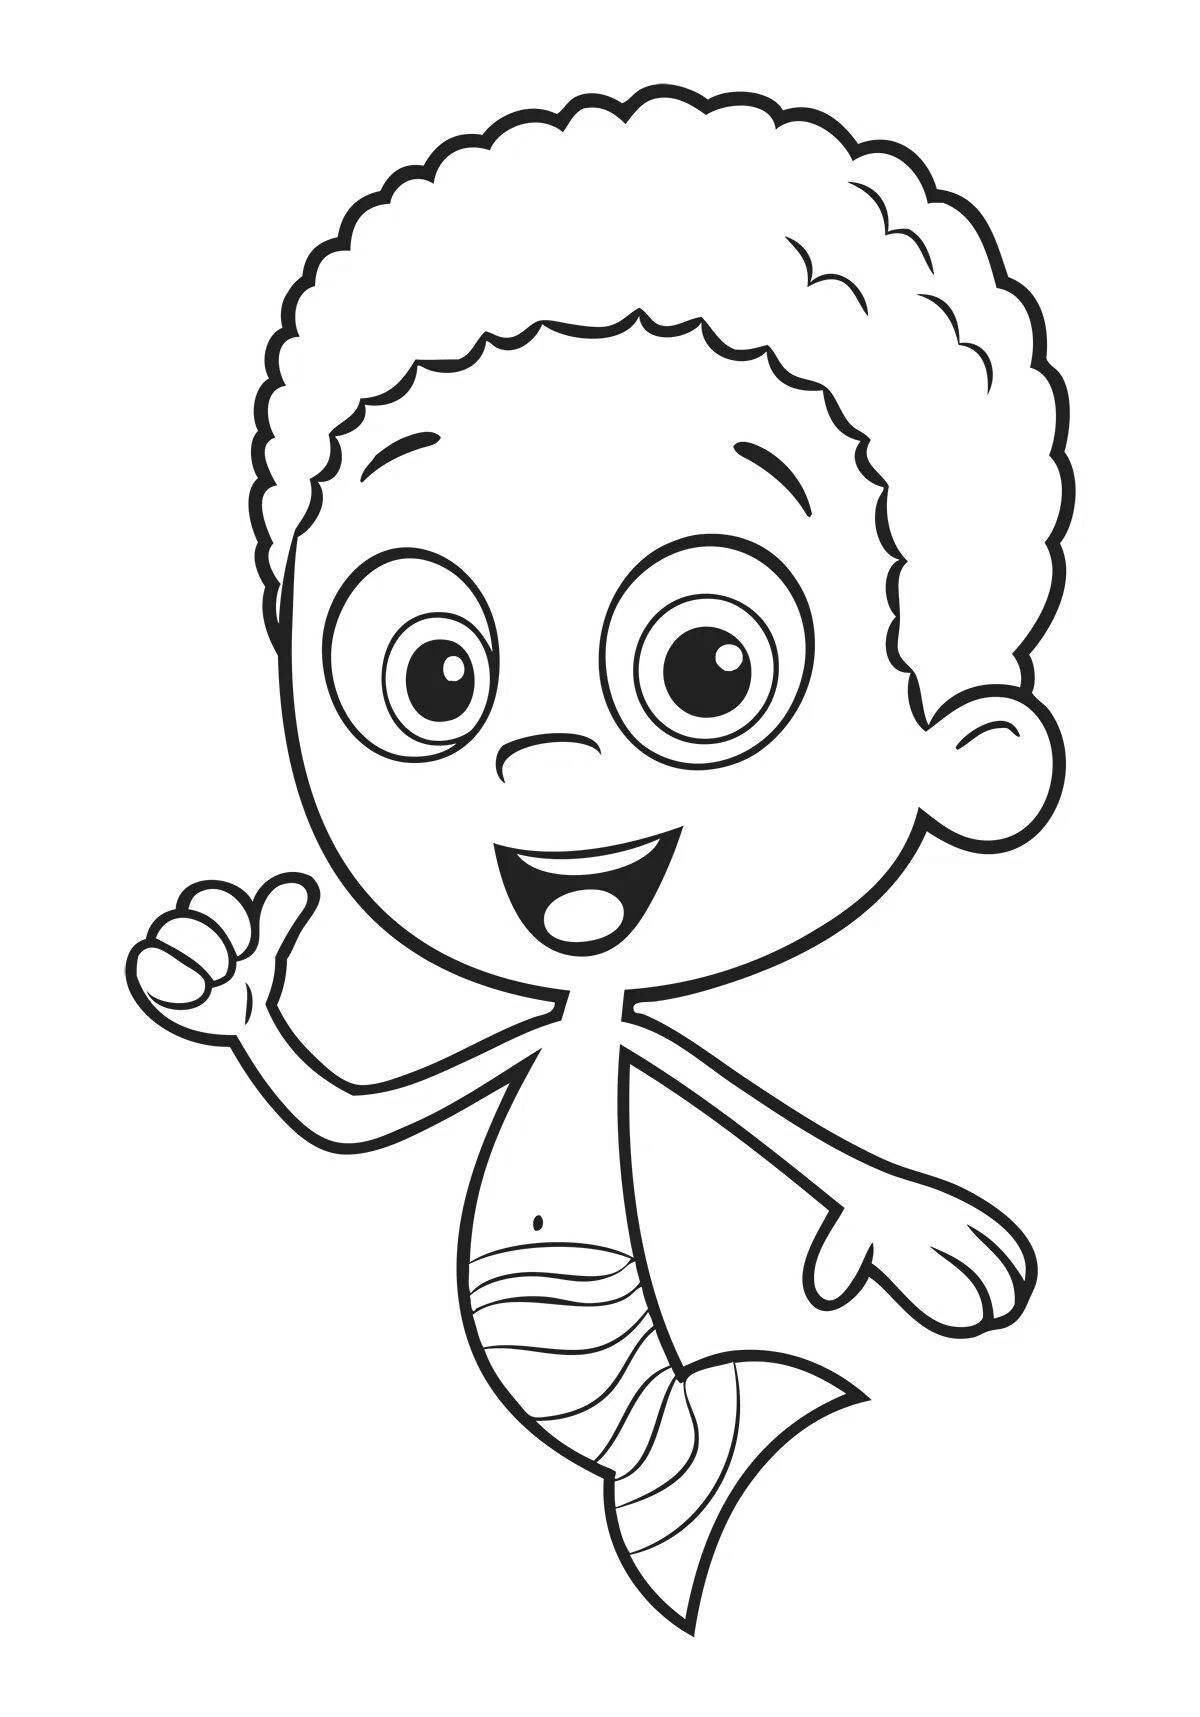 Funny bubble coloring page